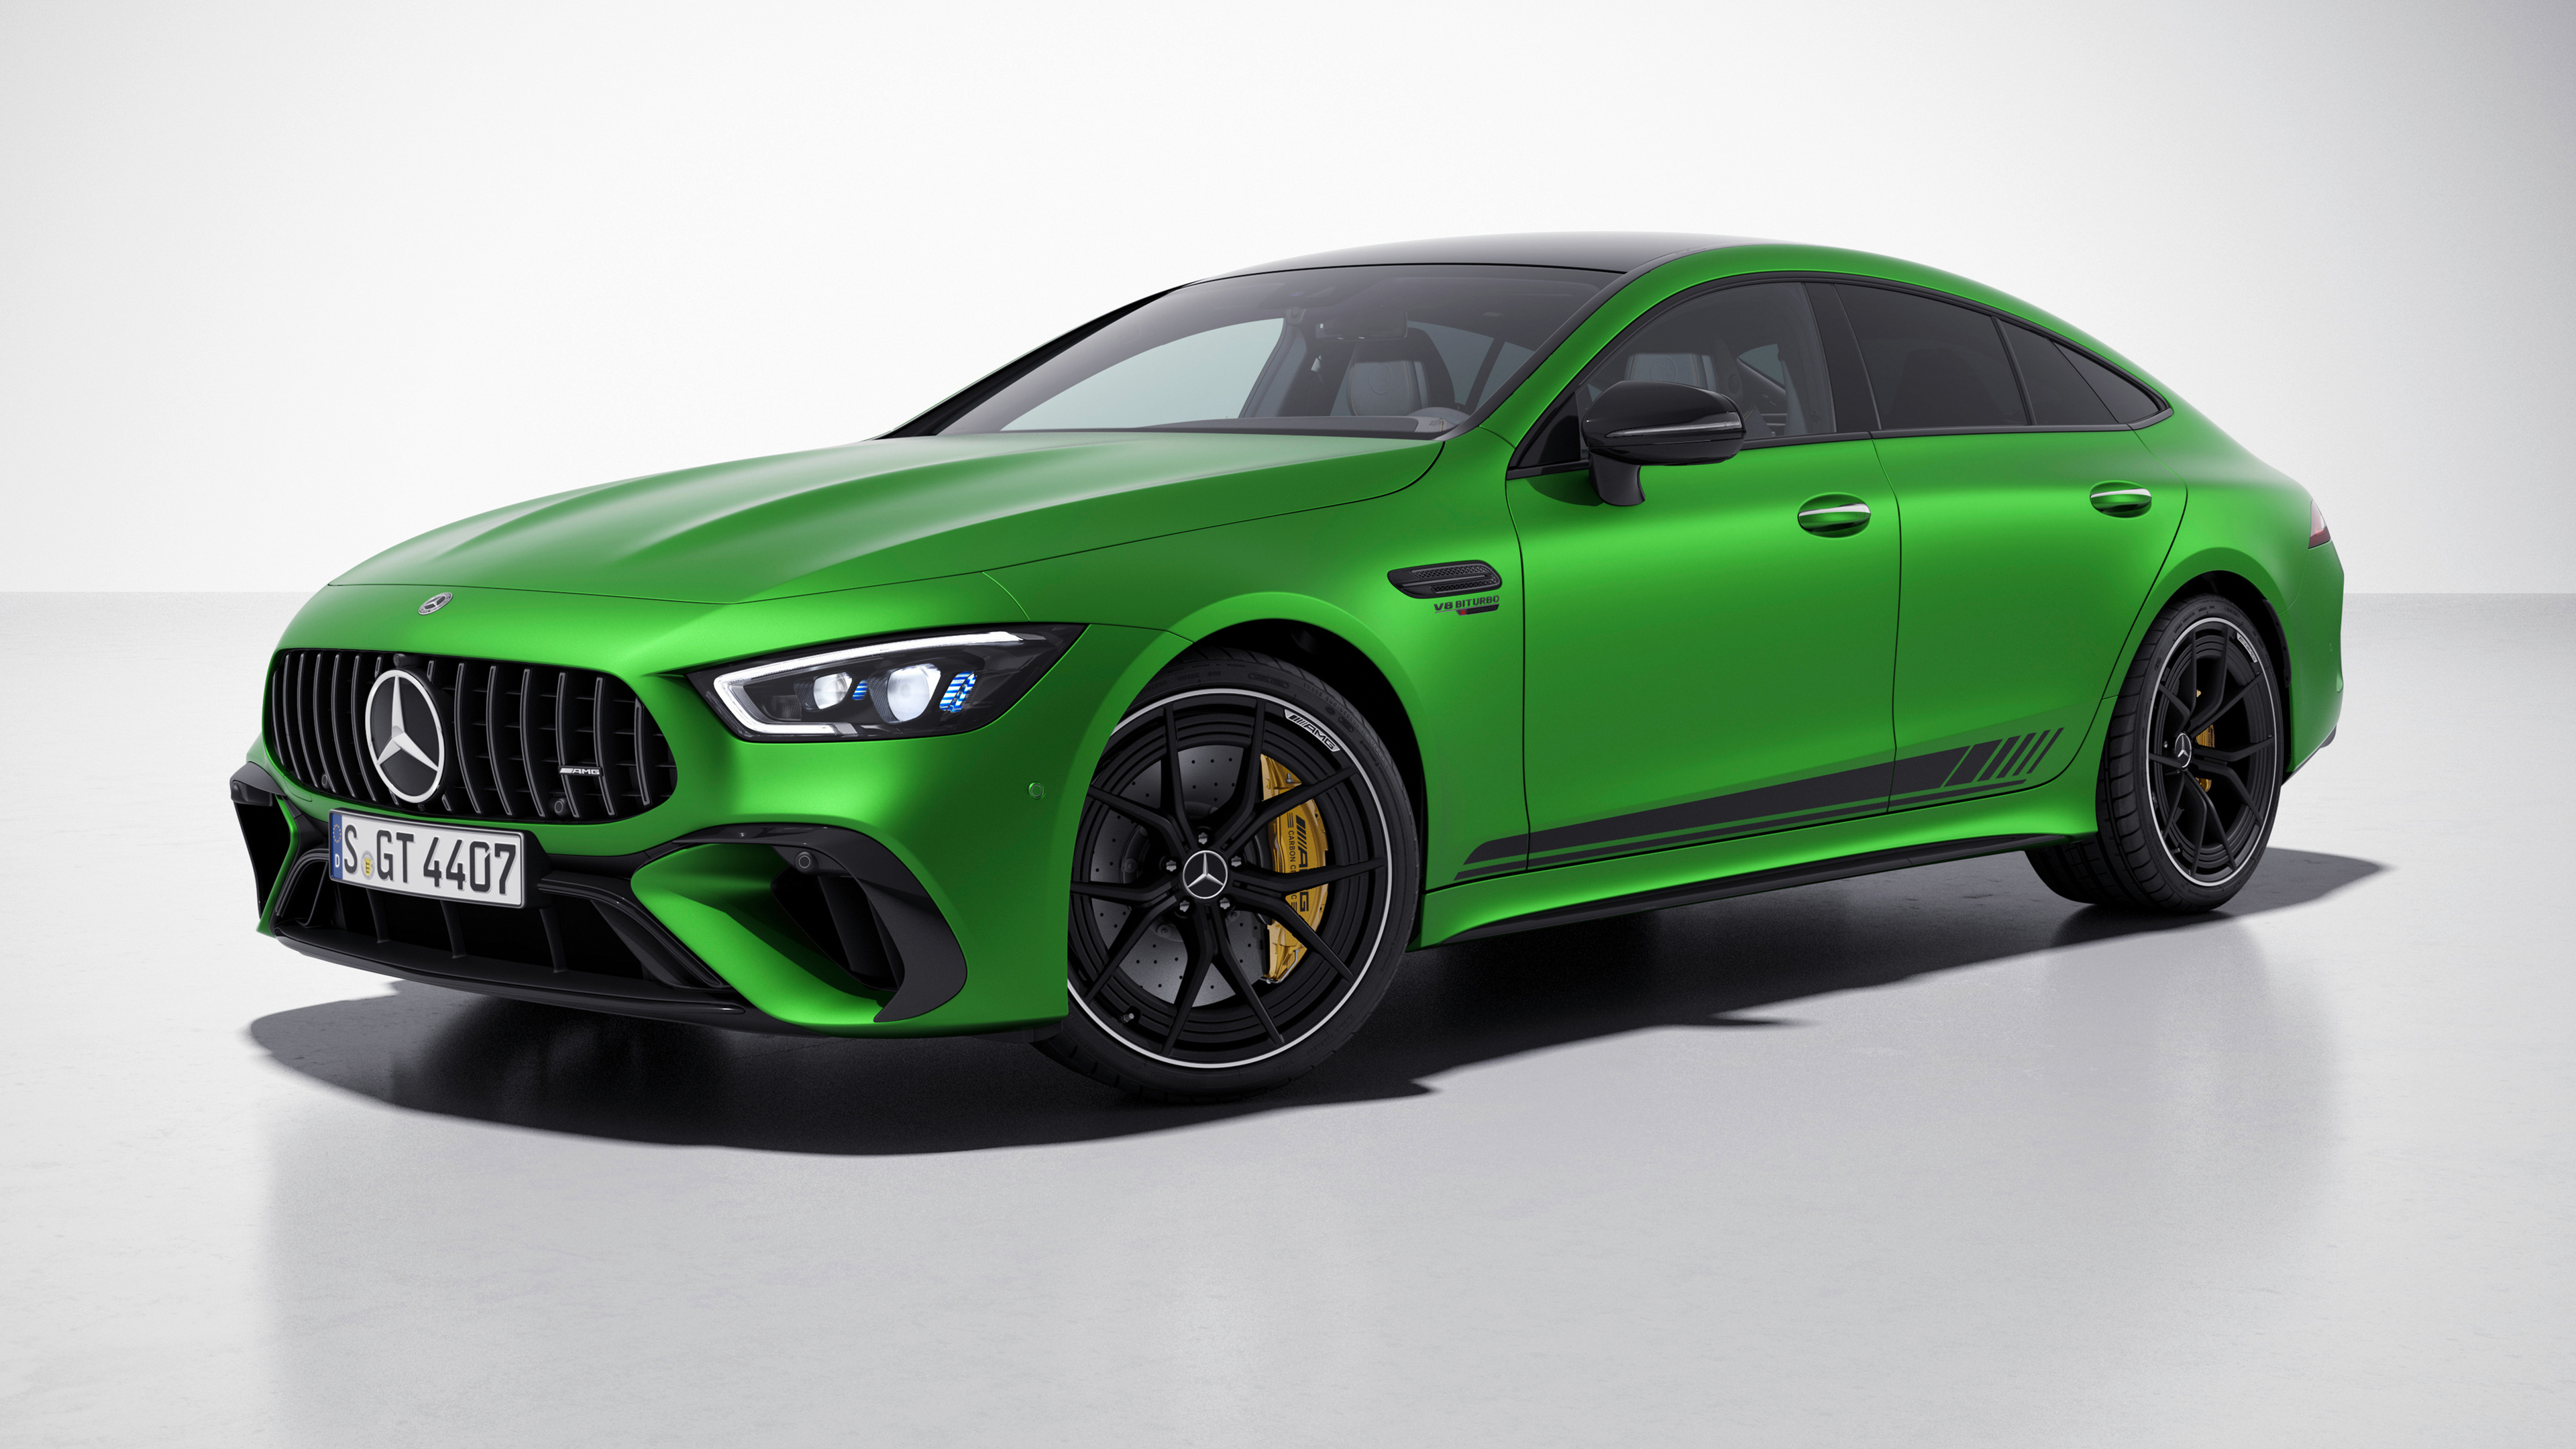 Mercedes AMG GT Car Green Cars Simple Background Minimalism Front Angle View 3840x2160